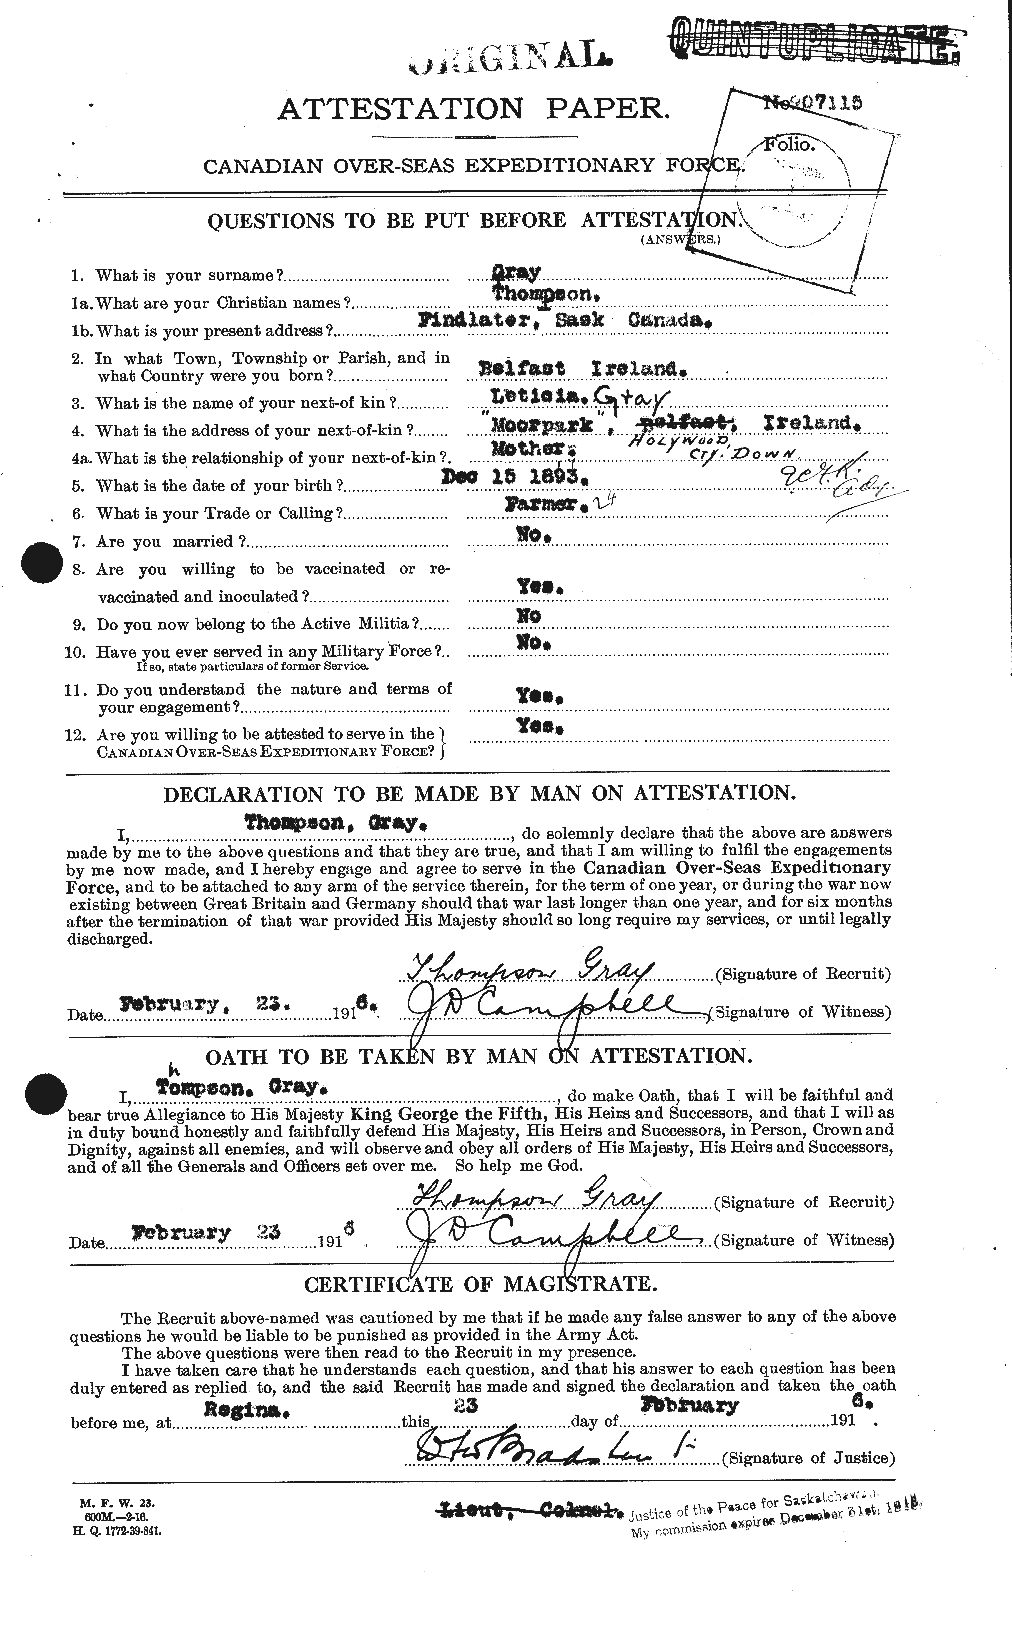 Personnel Records of the First World War - CEF 361732a